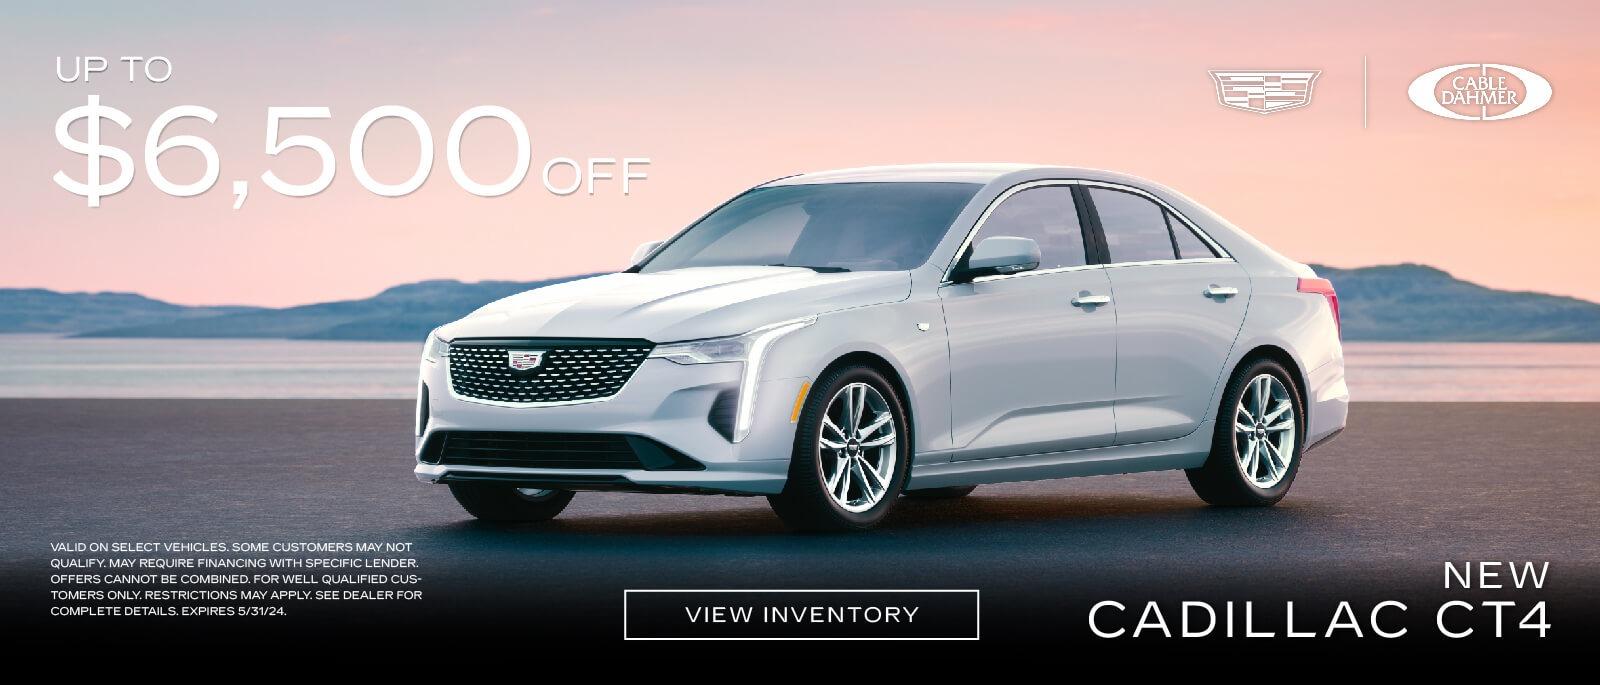 New Cadillac CT4 get up to $6,500 off